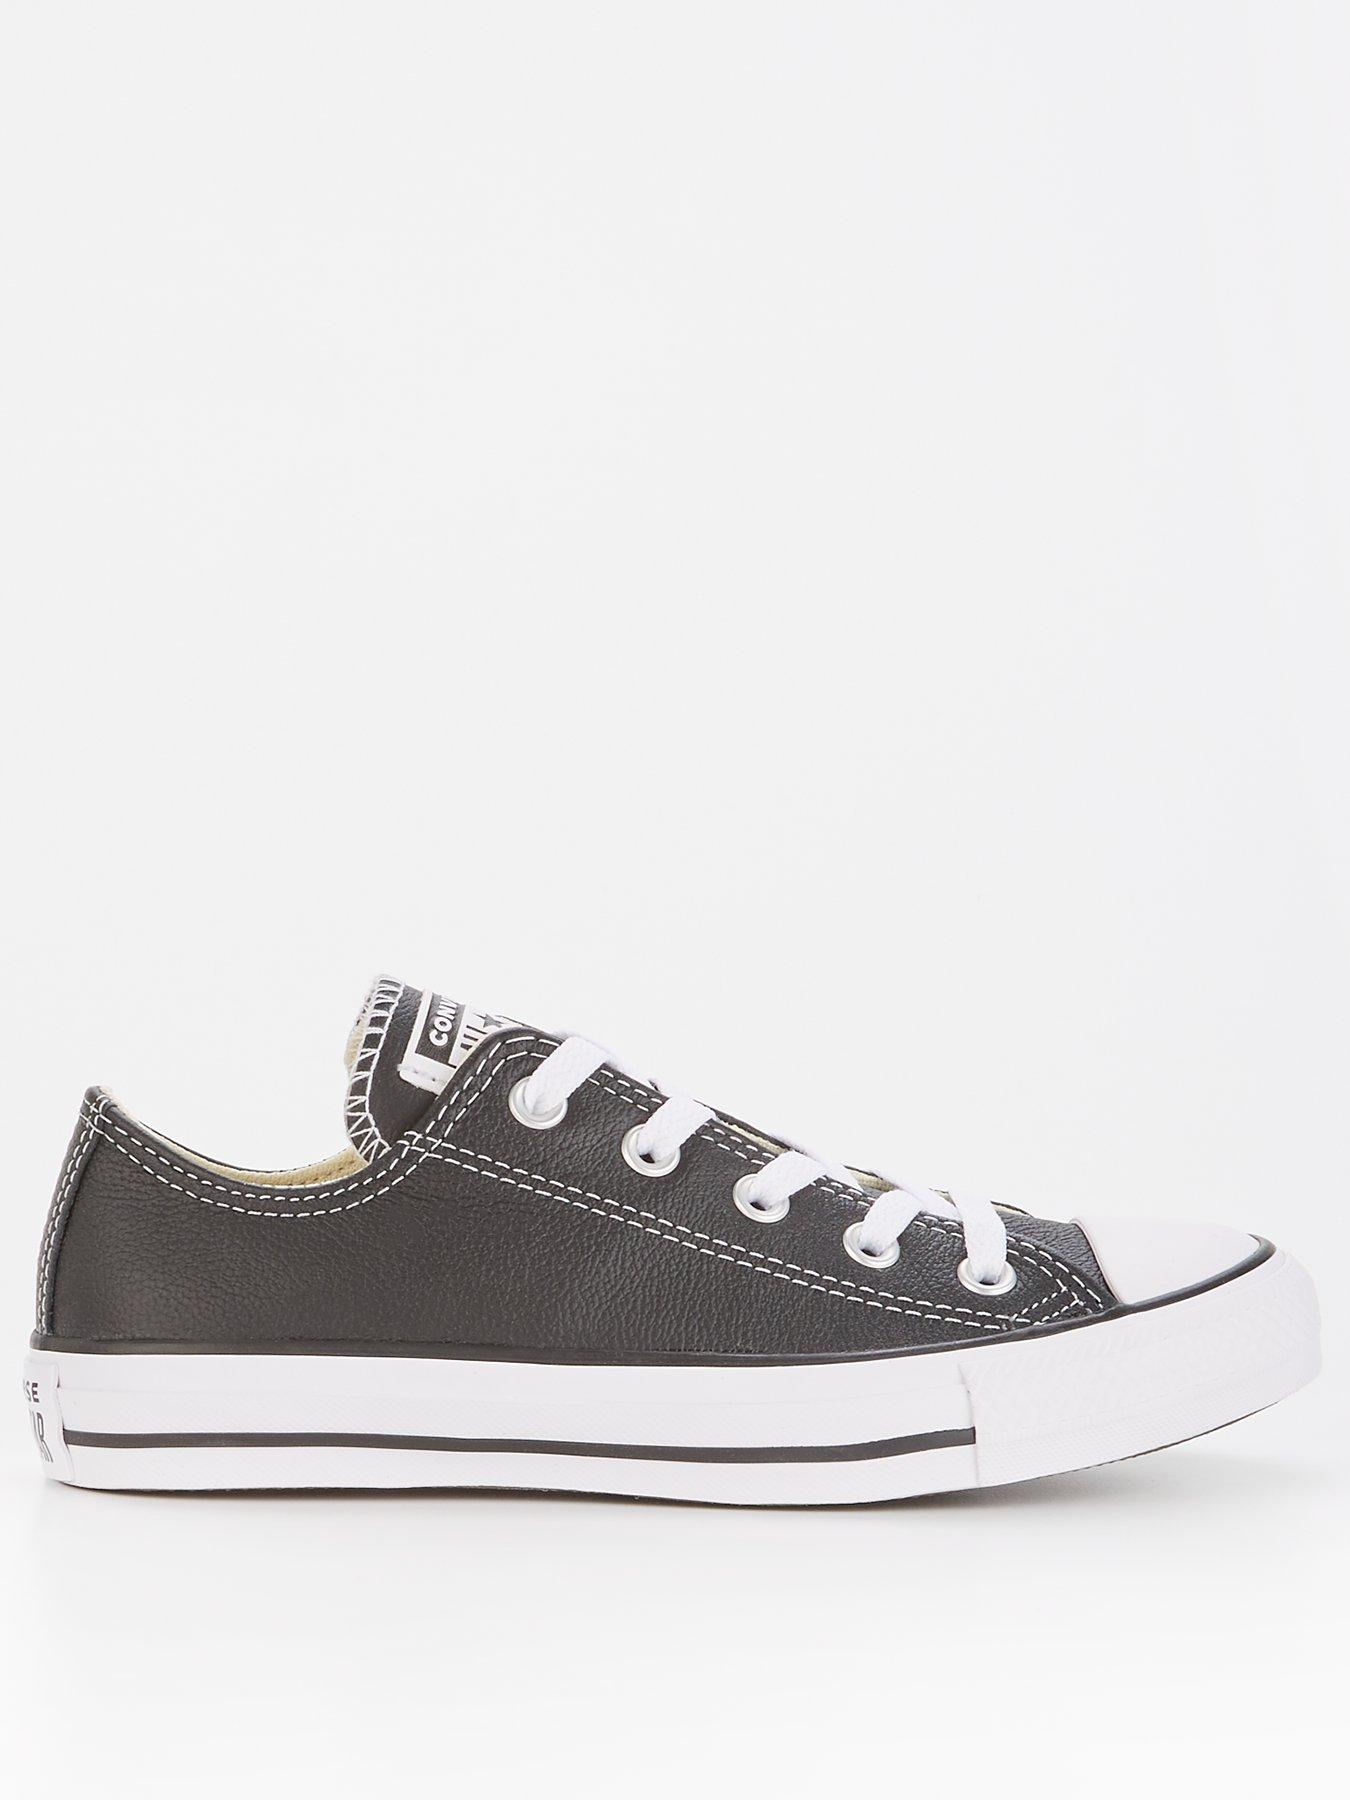 Converse Chuck Taylor All Star Leather Ox - Black white very.co.uk